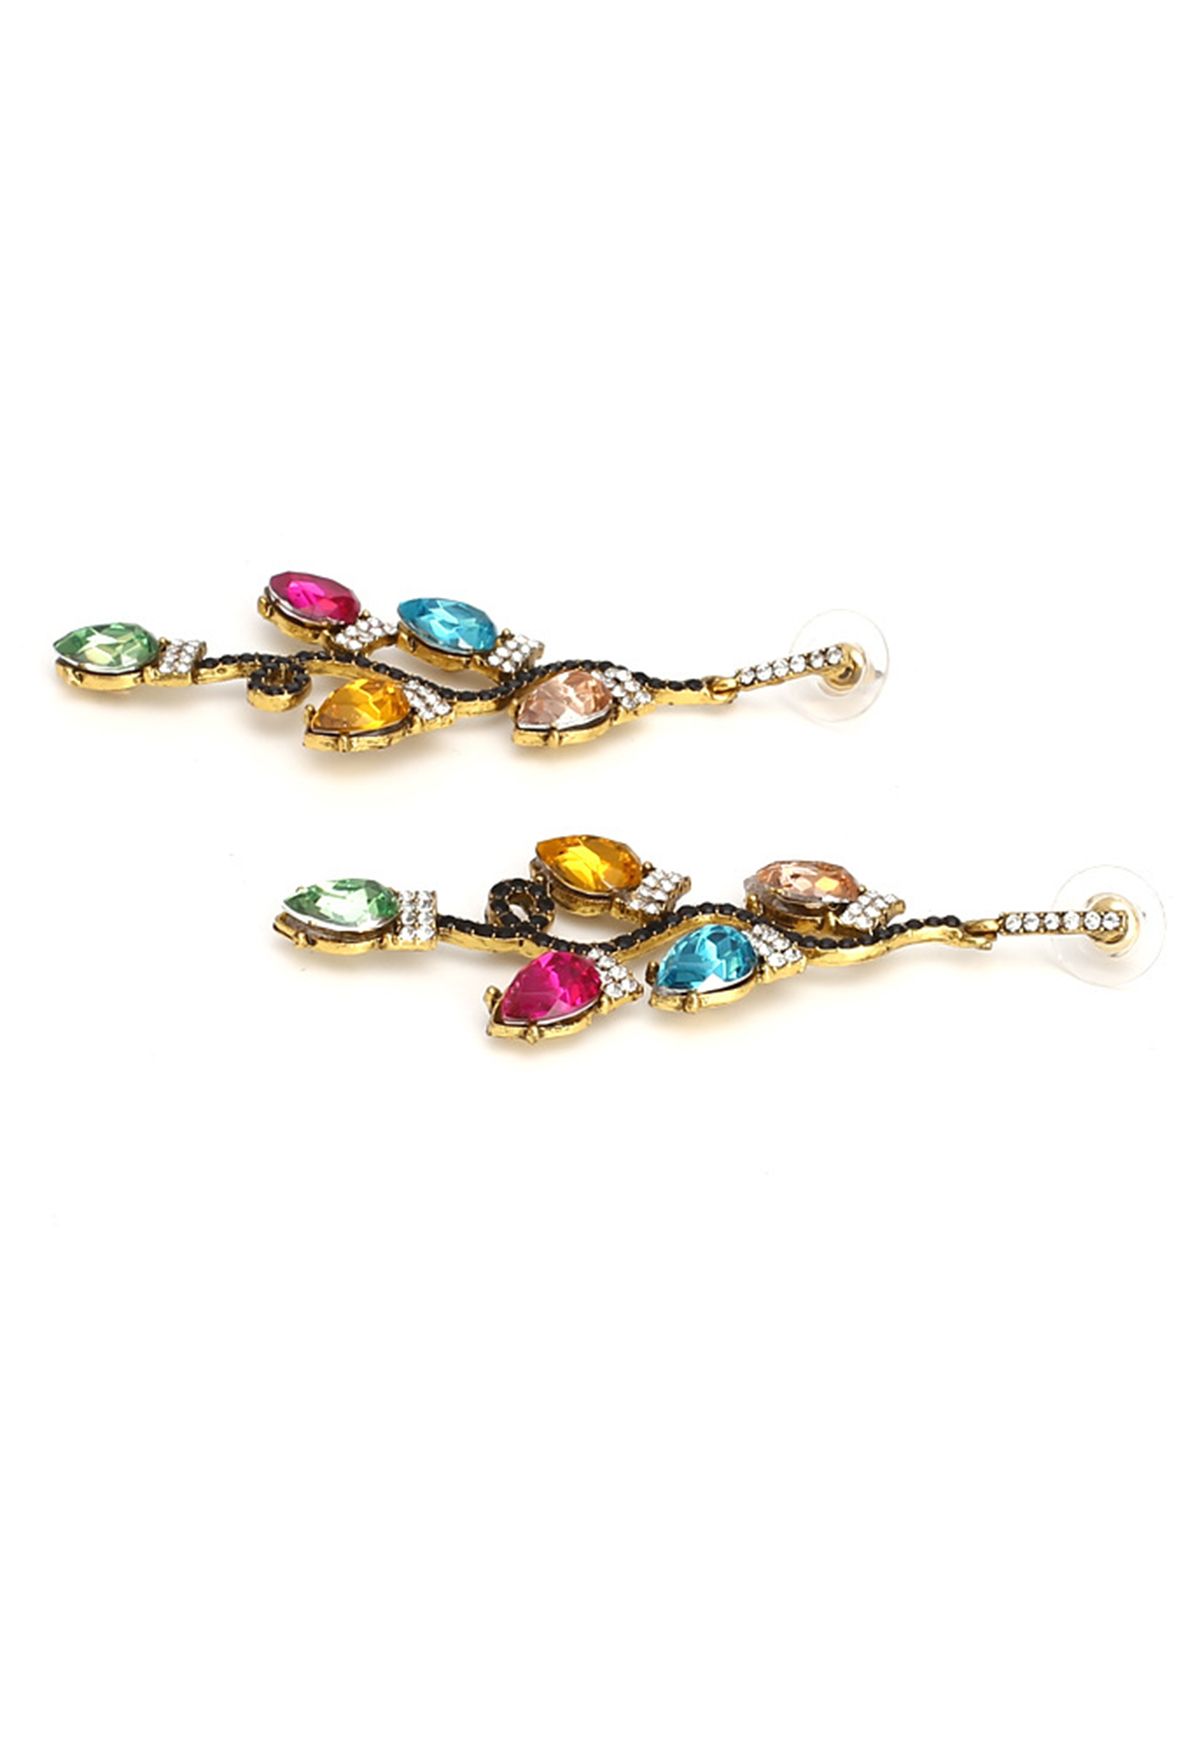 Mix Color Resin Lights Drop Earrings